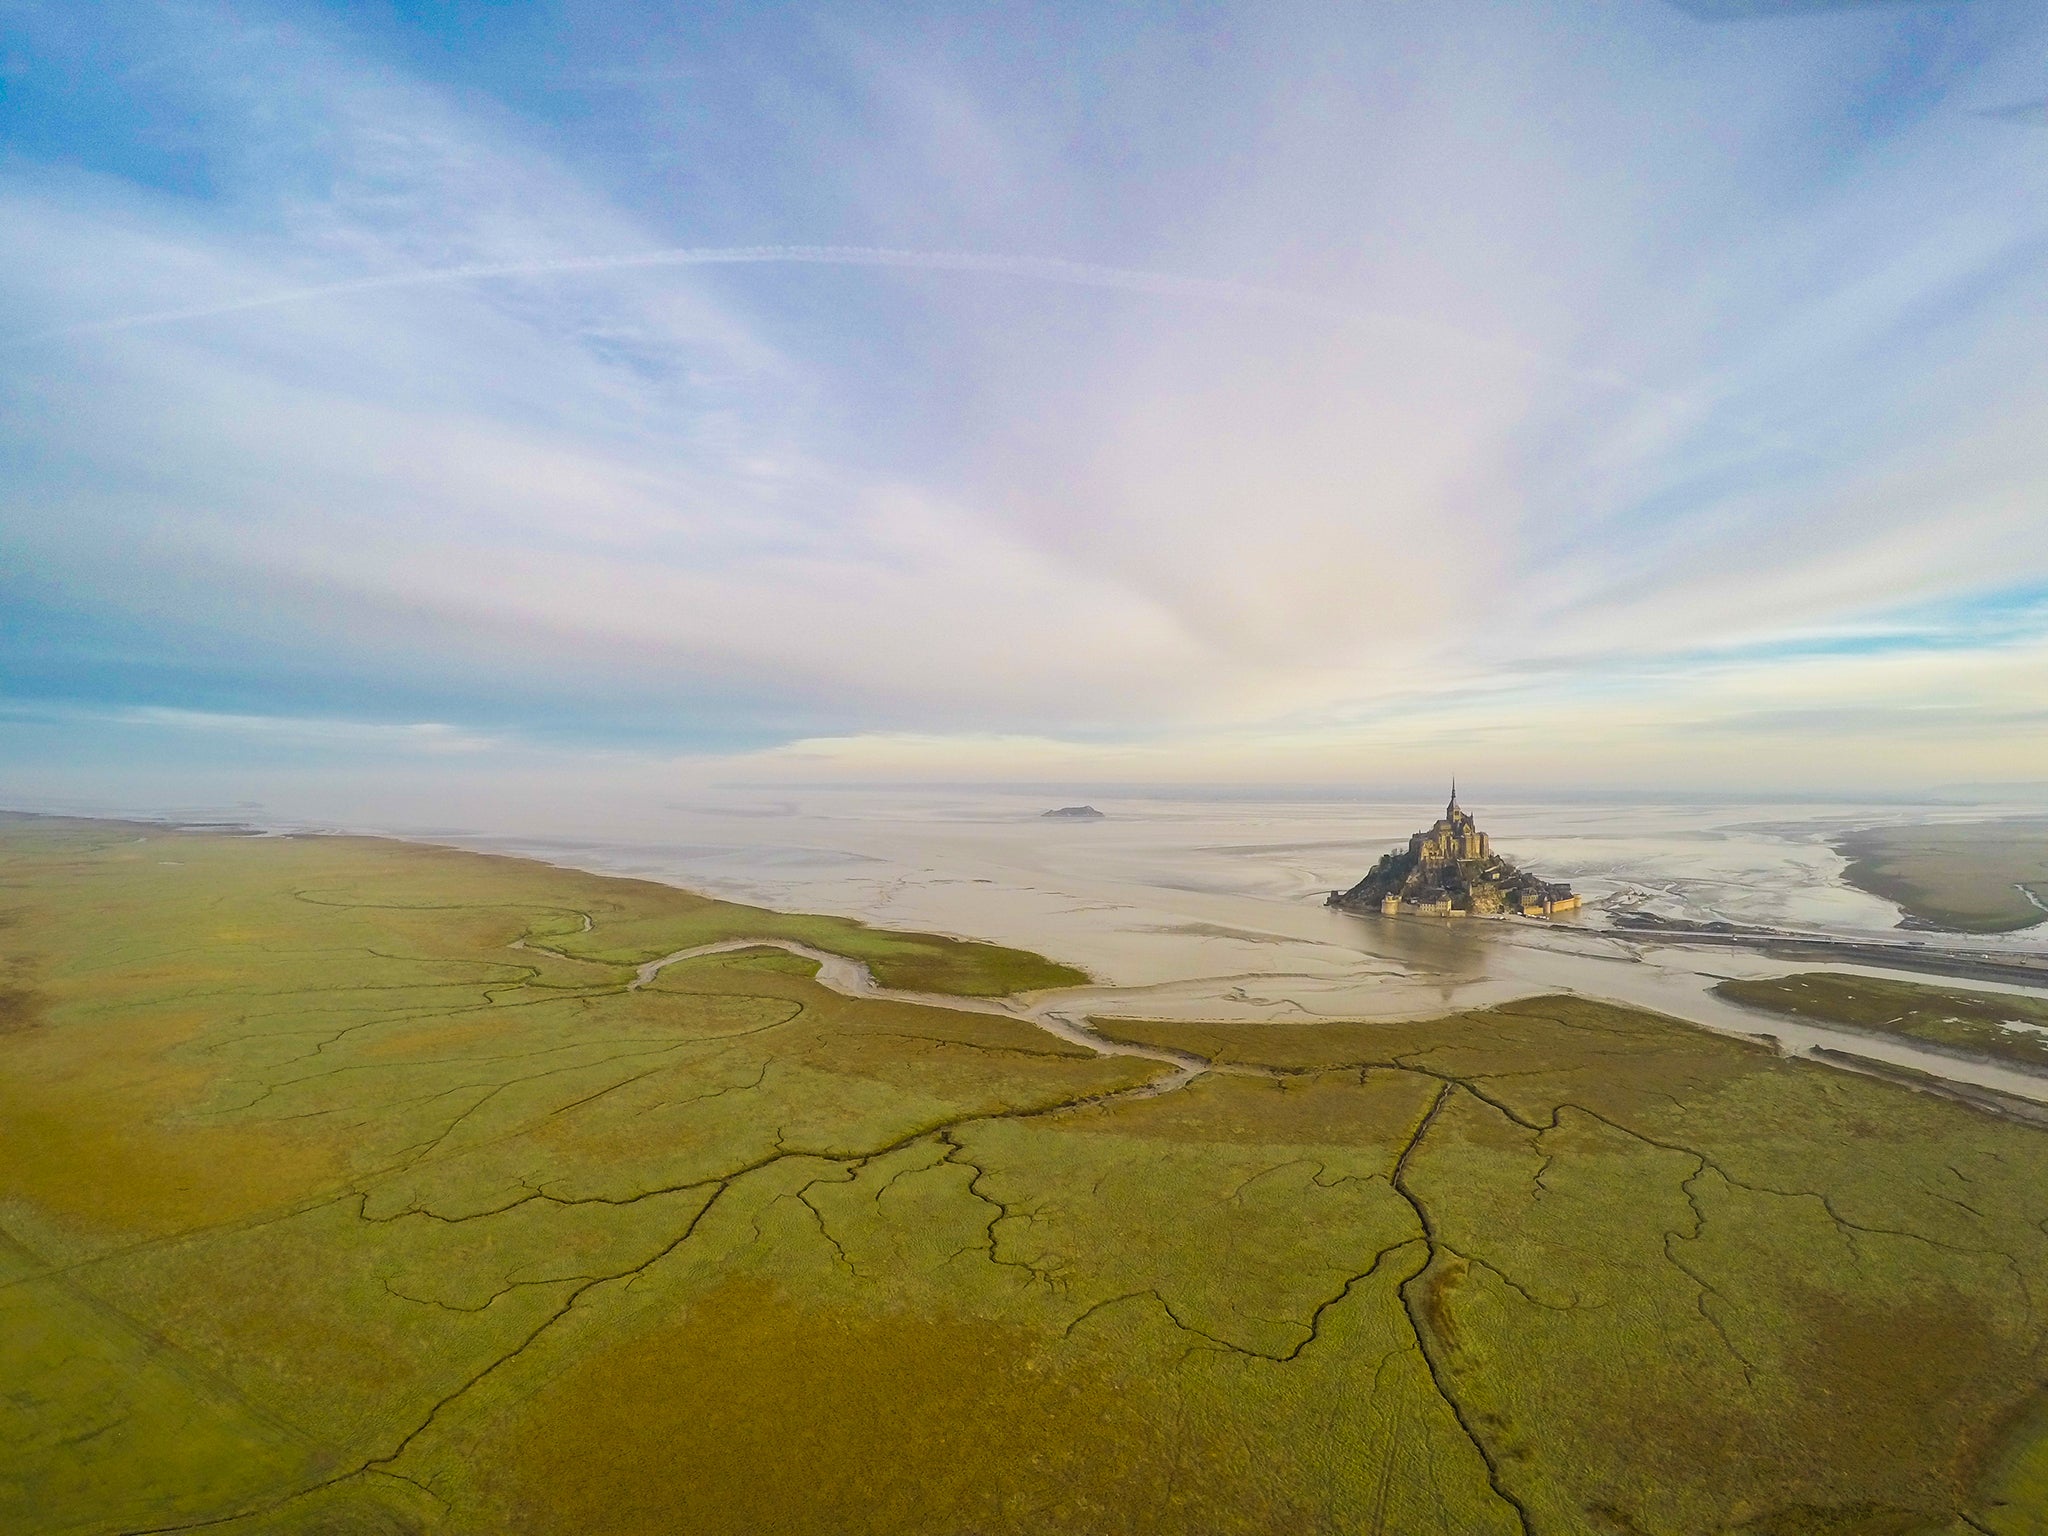 &#13;
Supertide turns Mont-Saint-Michel into an island, by Wanaifilms&#13;